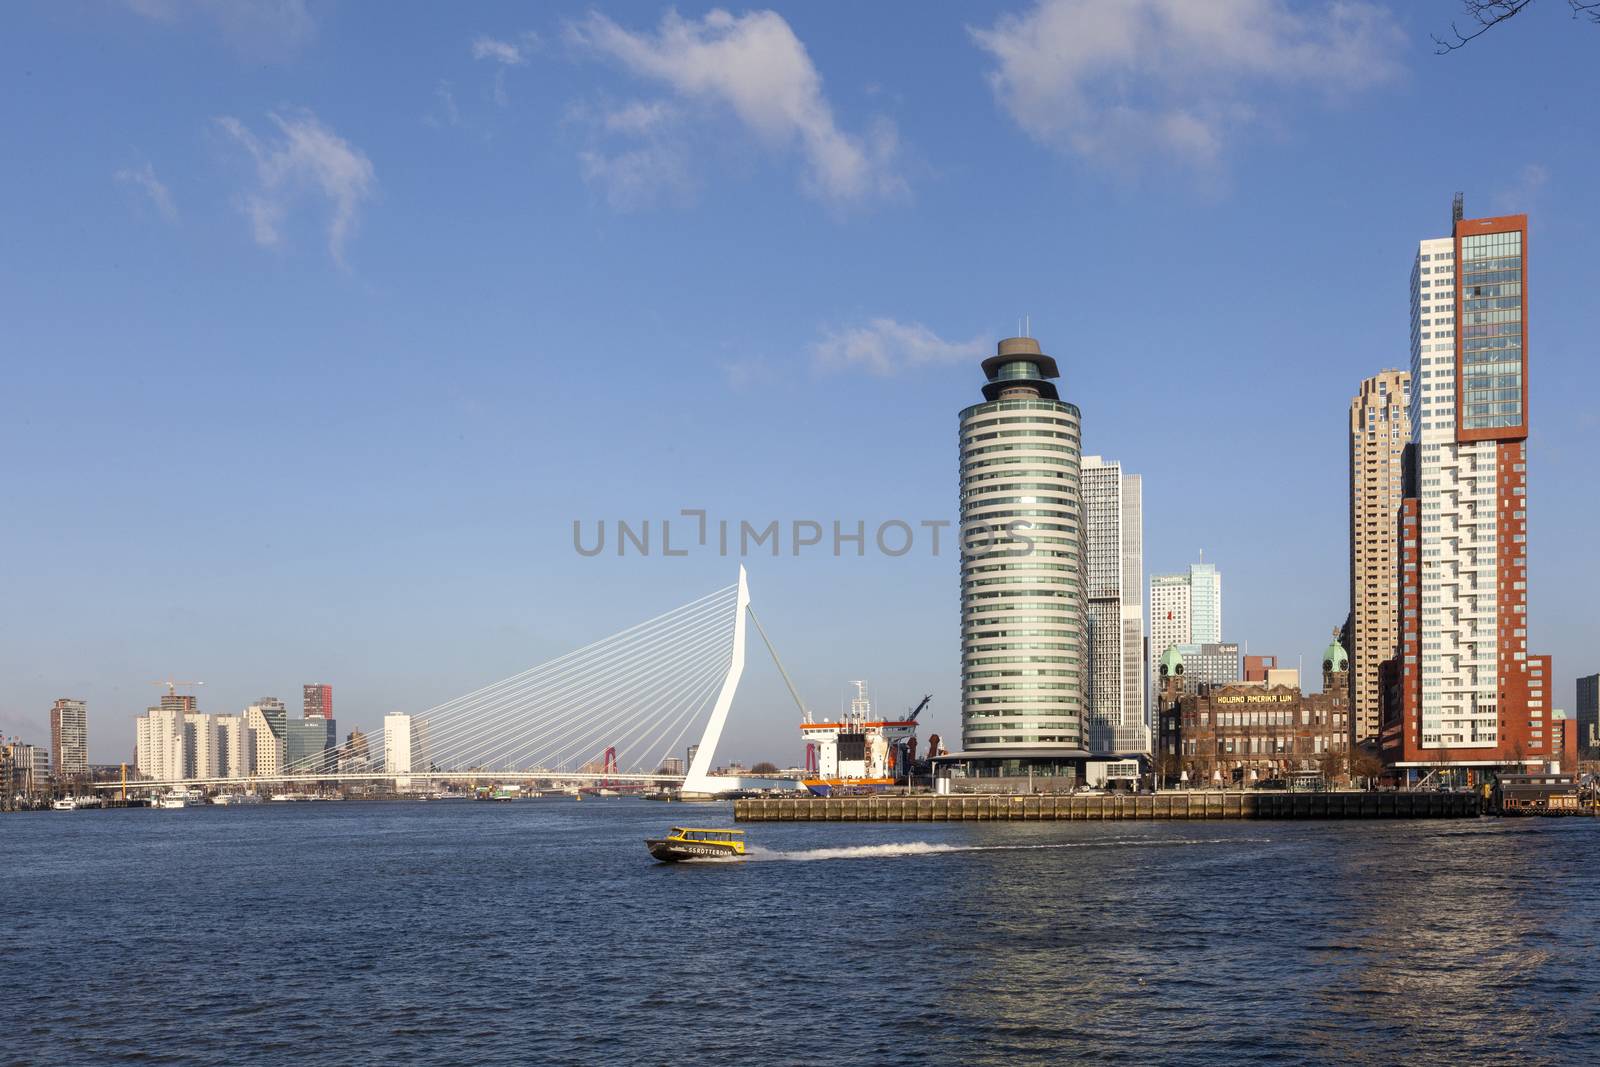 The Nieuwe Maas river in Rotterdam - the Netherlands - Image